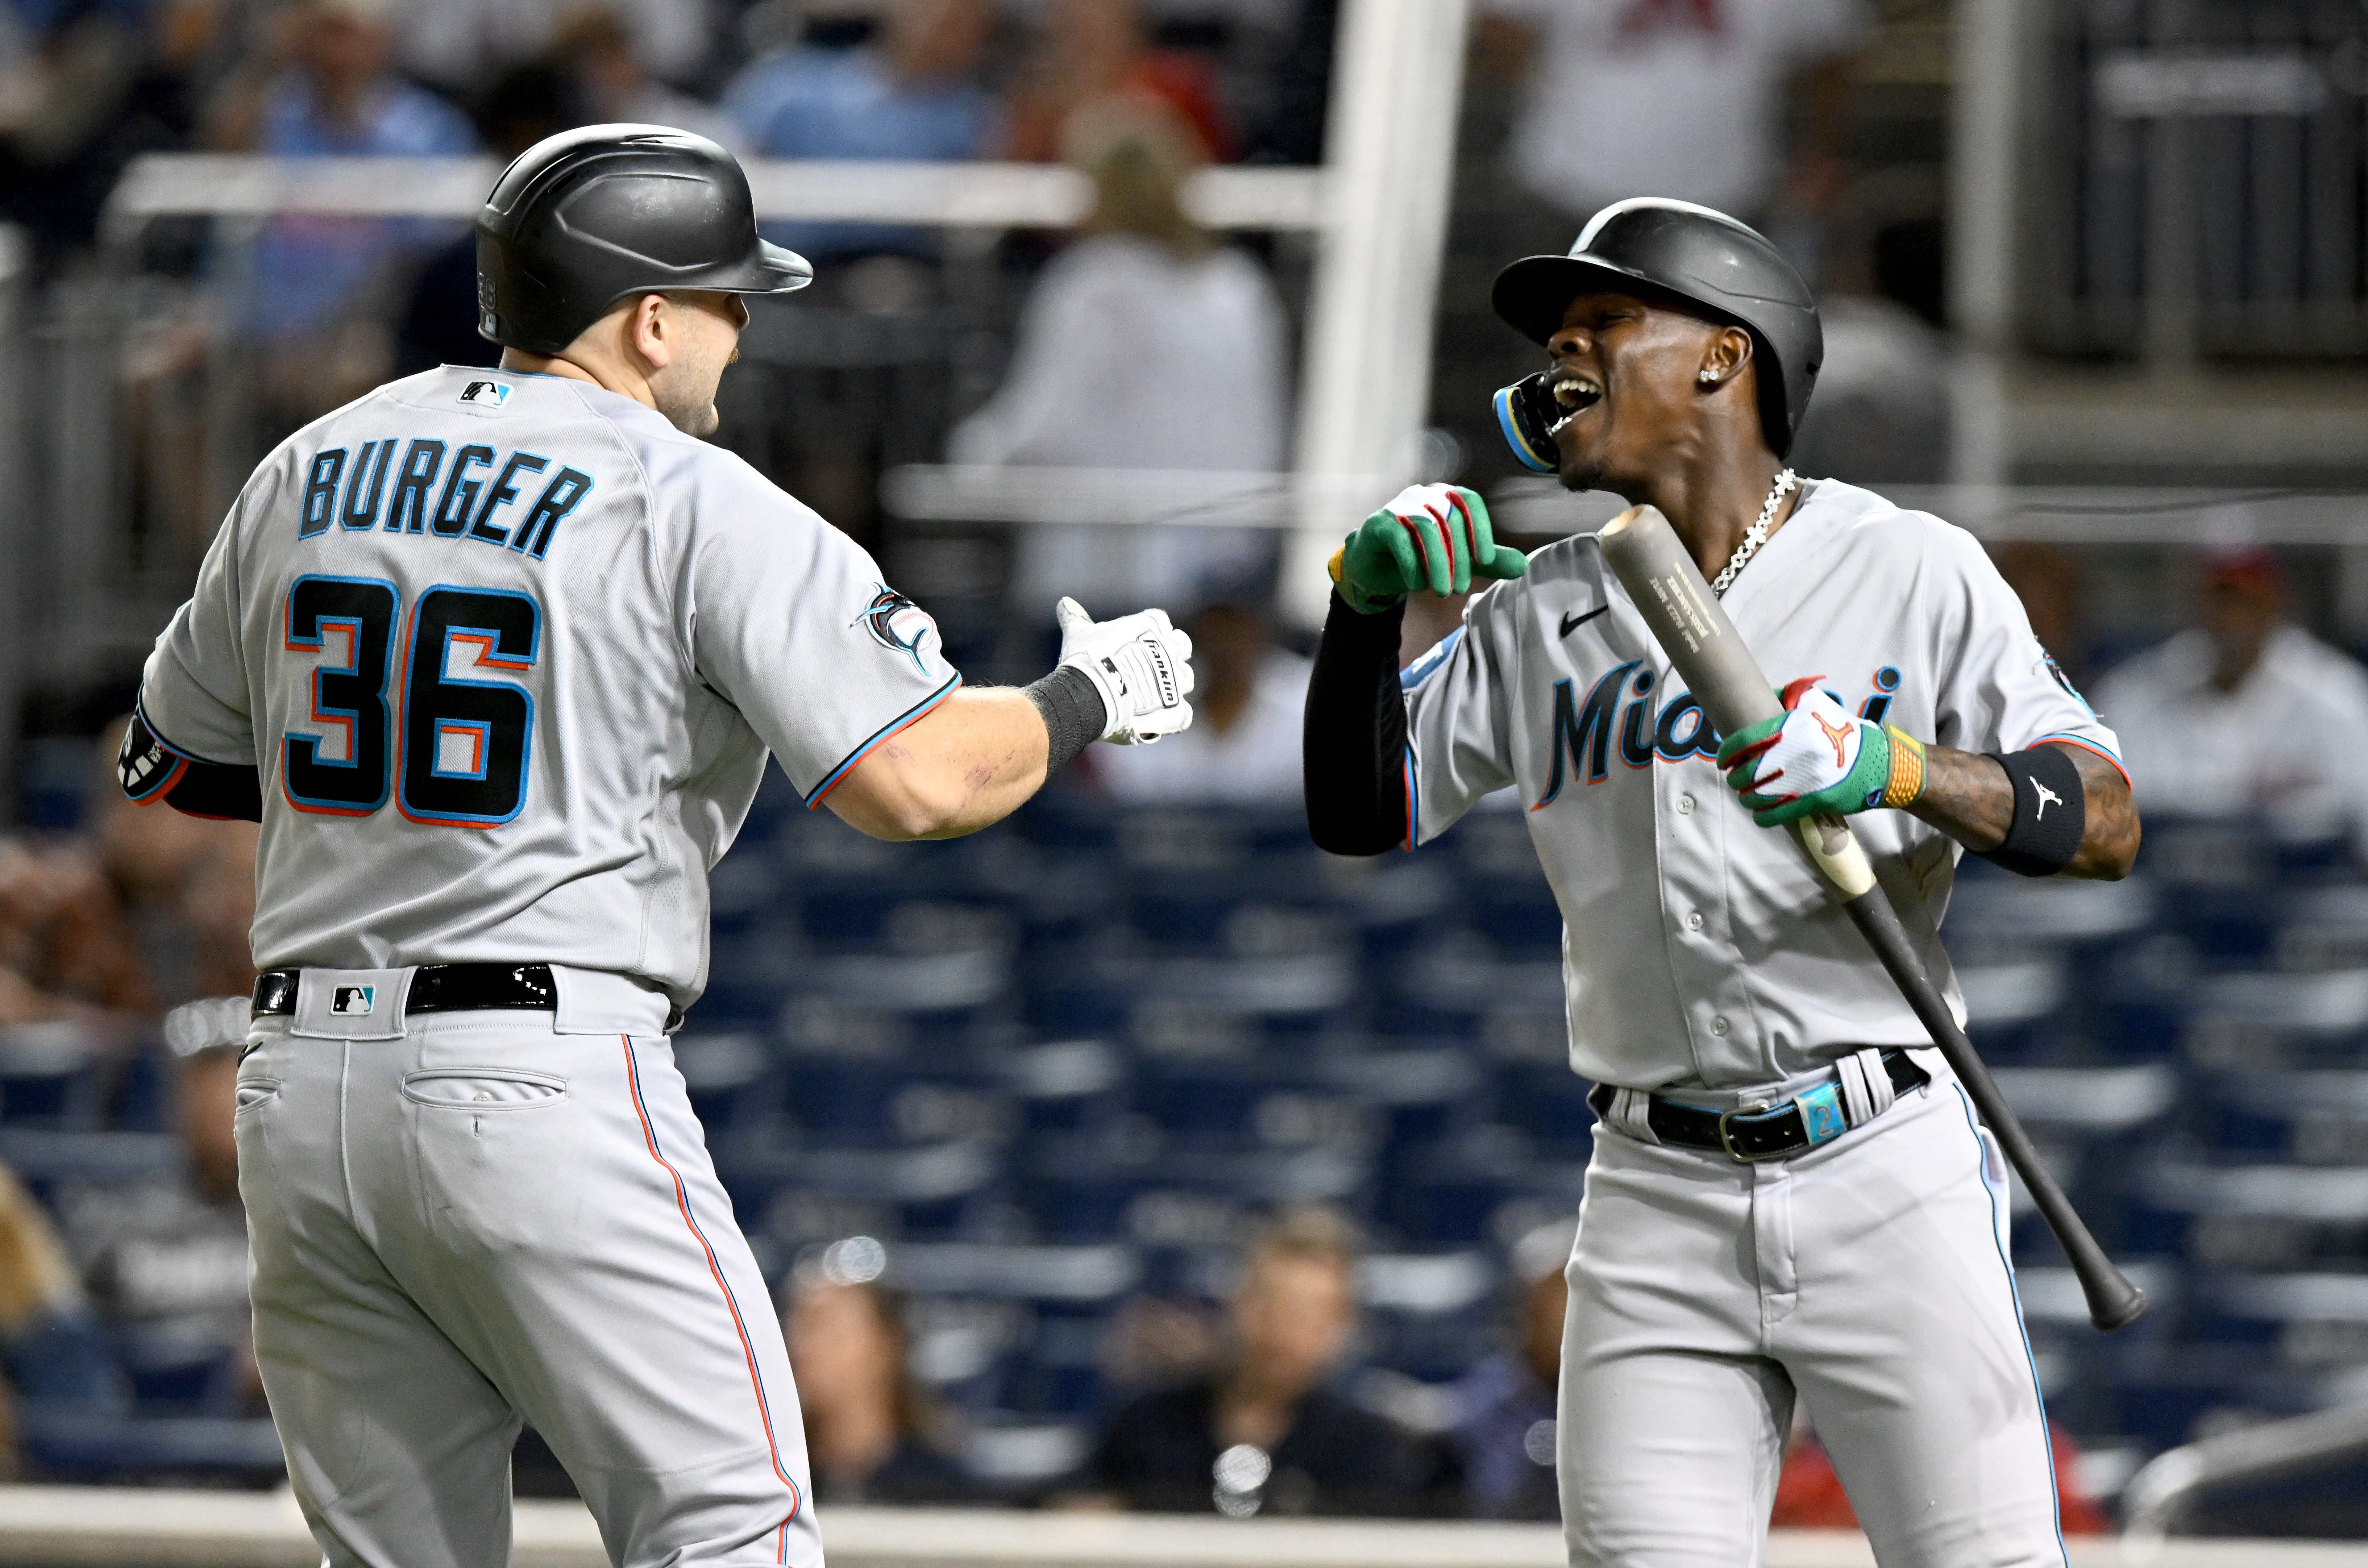 Chisholm's 3-run homer helps Marlins defeat Nationals 6-1 to get back to  .500